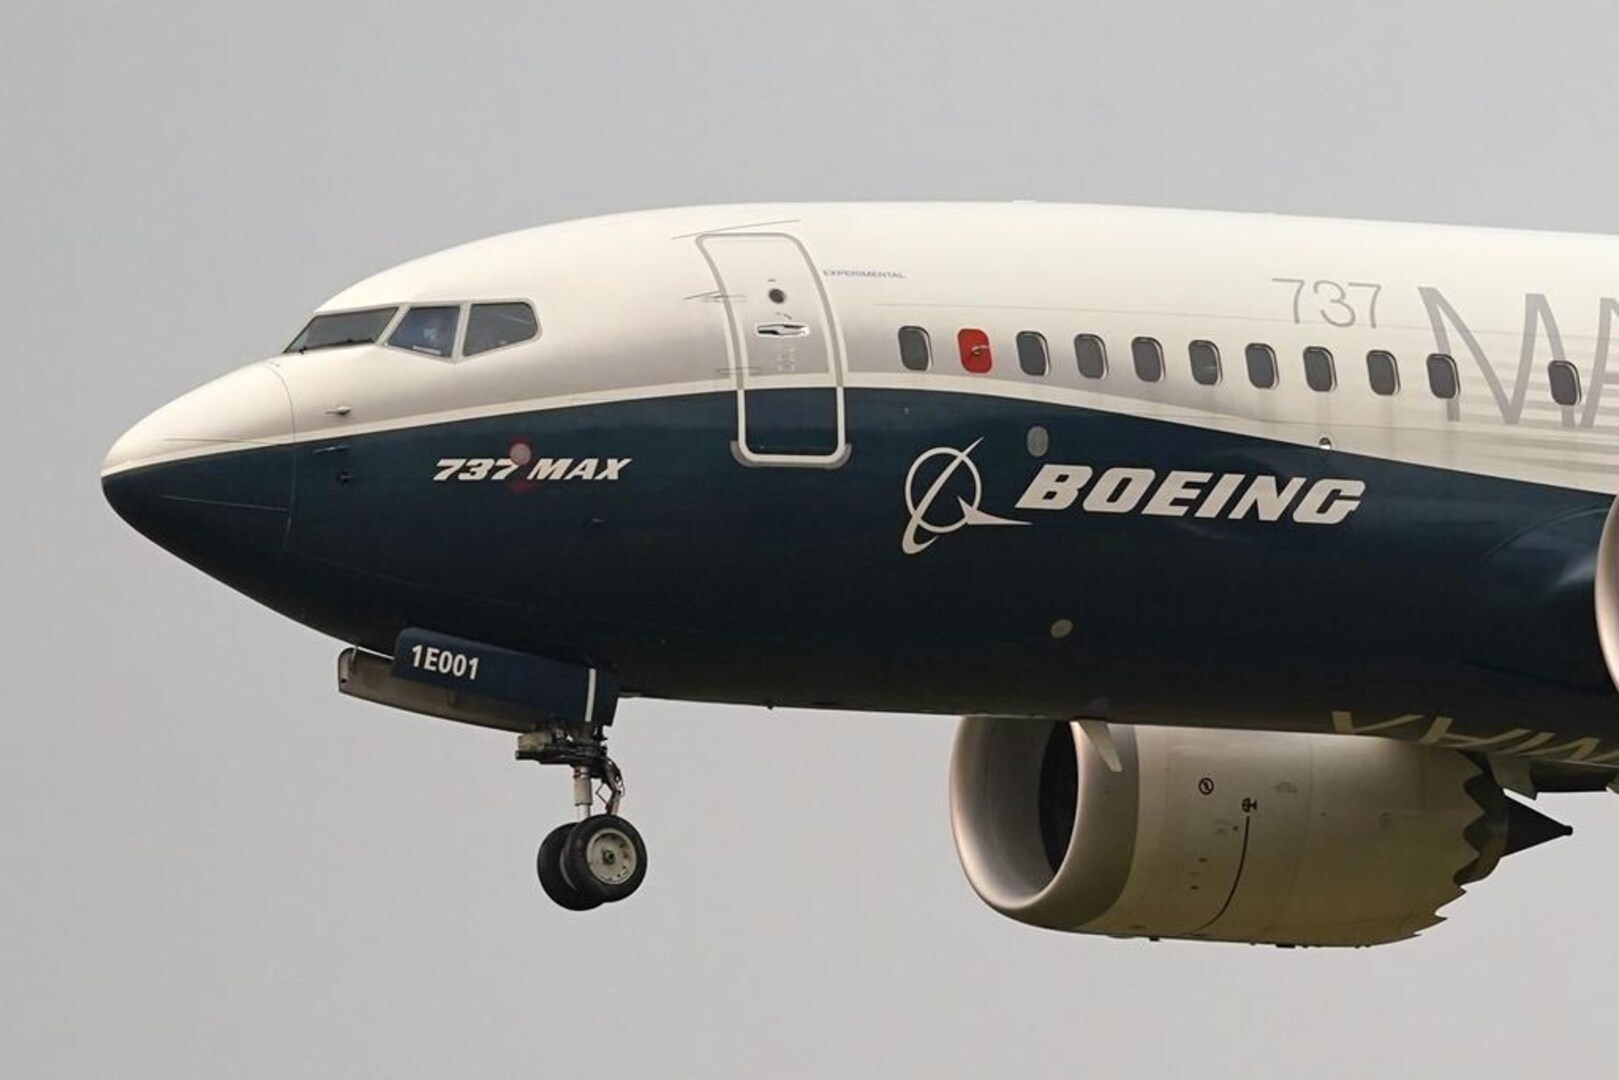 Business Report: Boeing staff may have falsified records